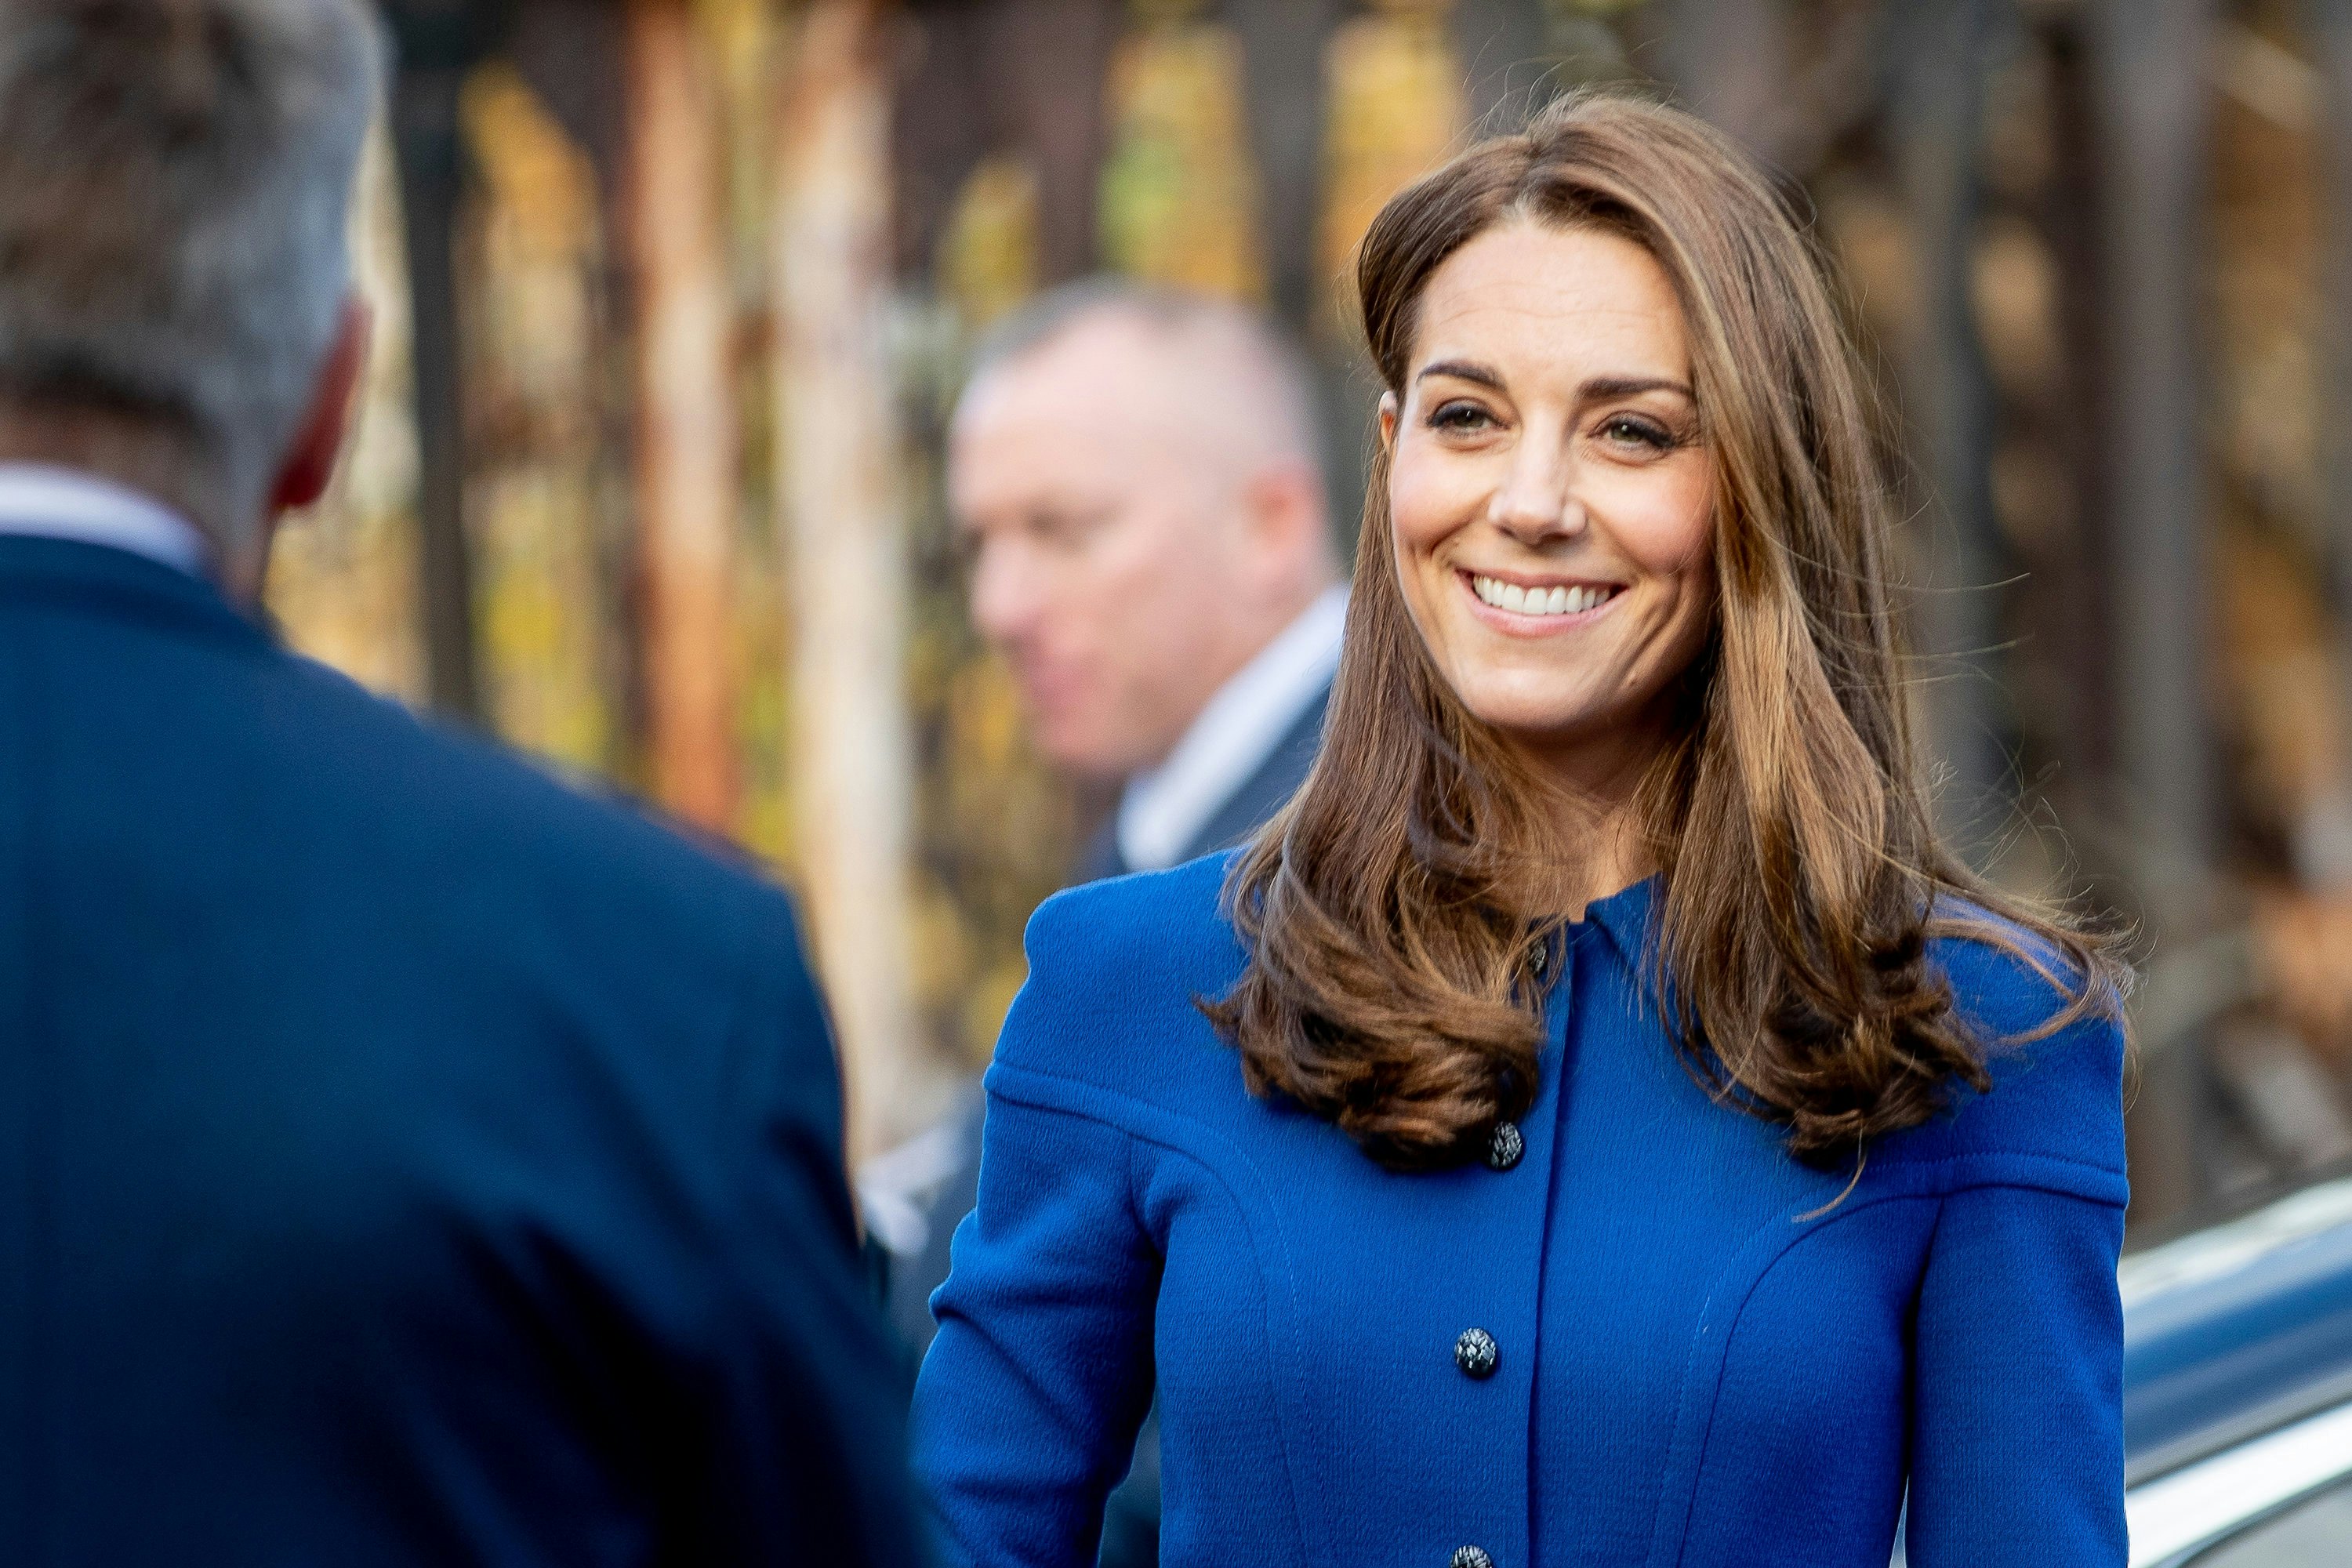 Kate Middleton's Top-Handle Bag Is Fancier Than a Crossbody: Get the Look